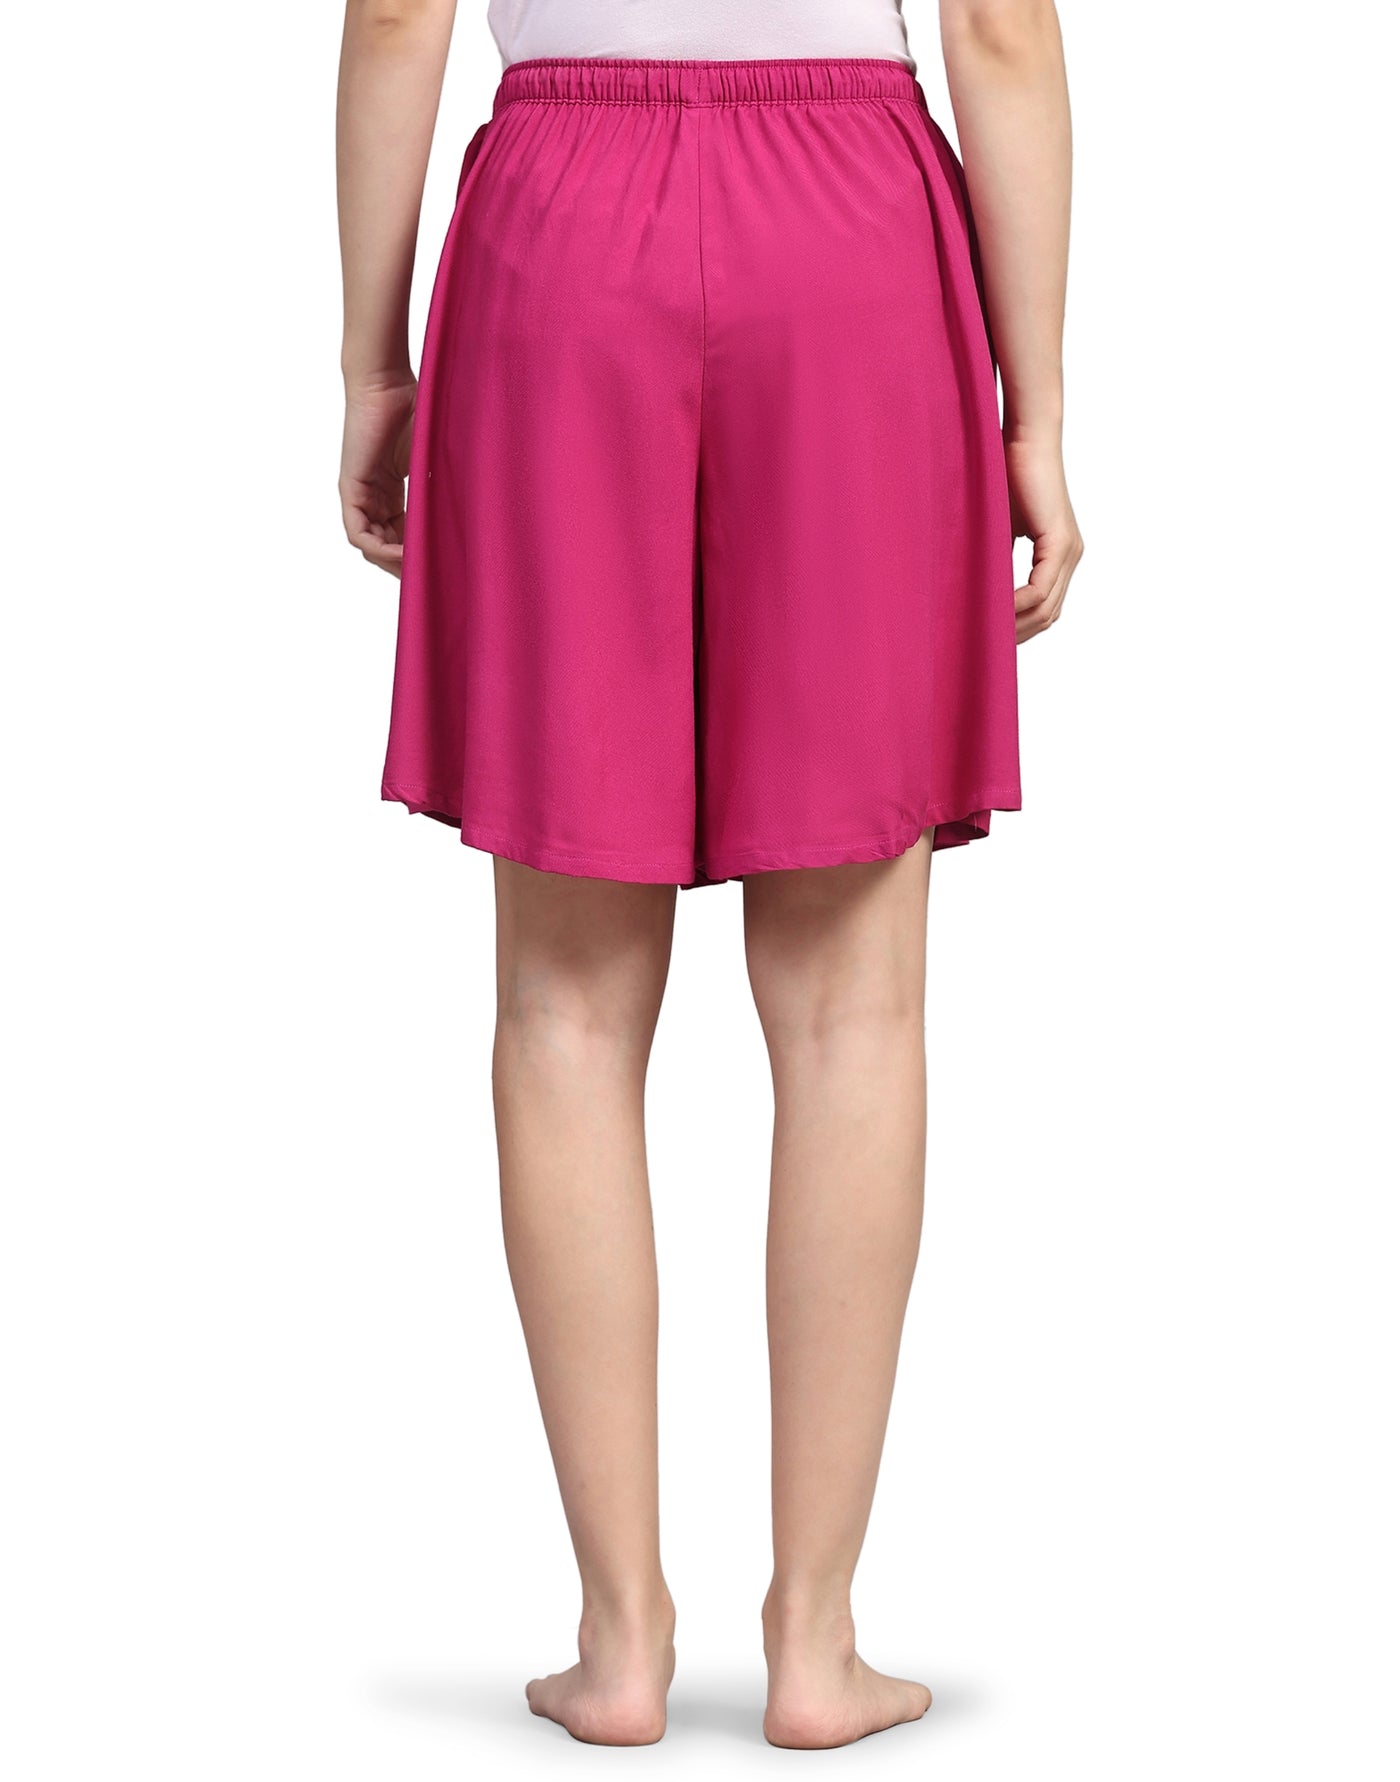 Culotte Shorts for Women-Magenta Solid